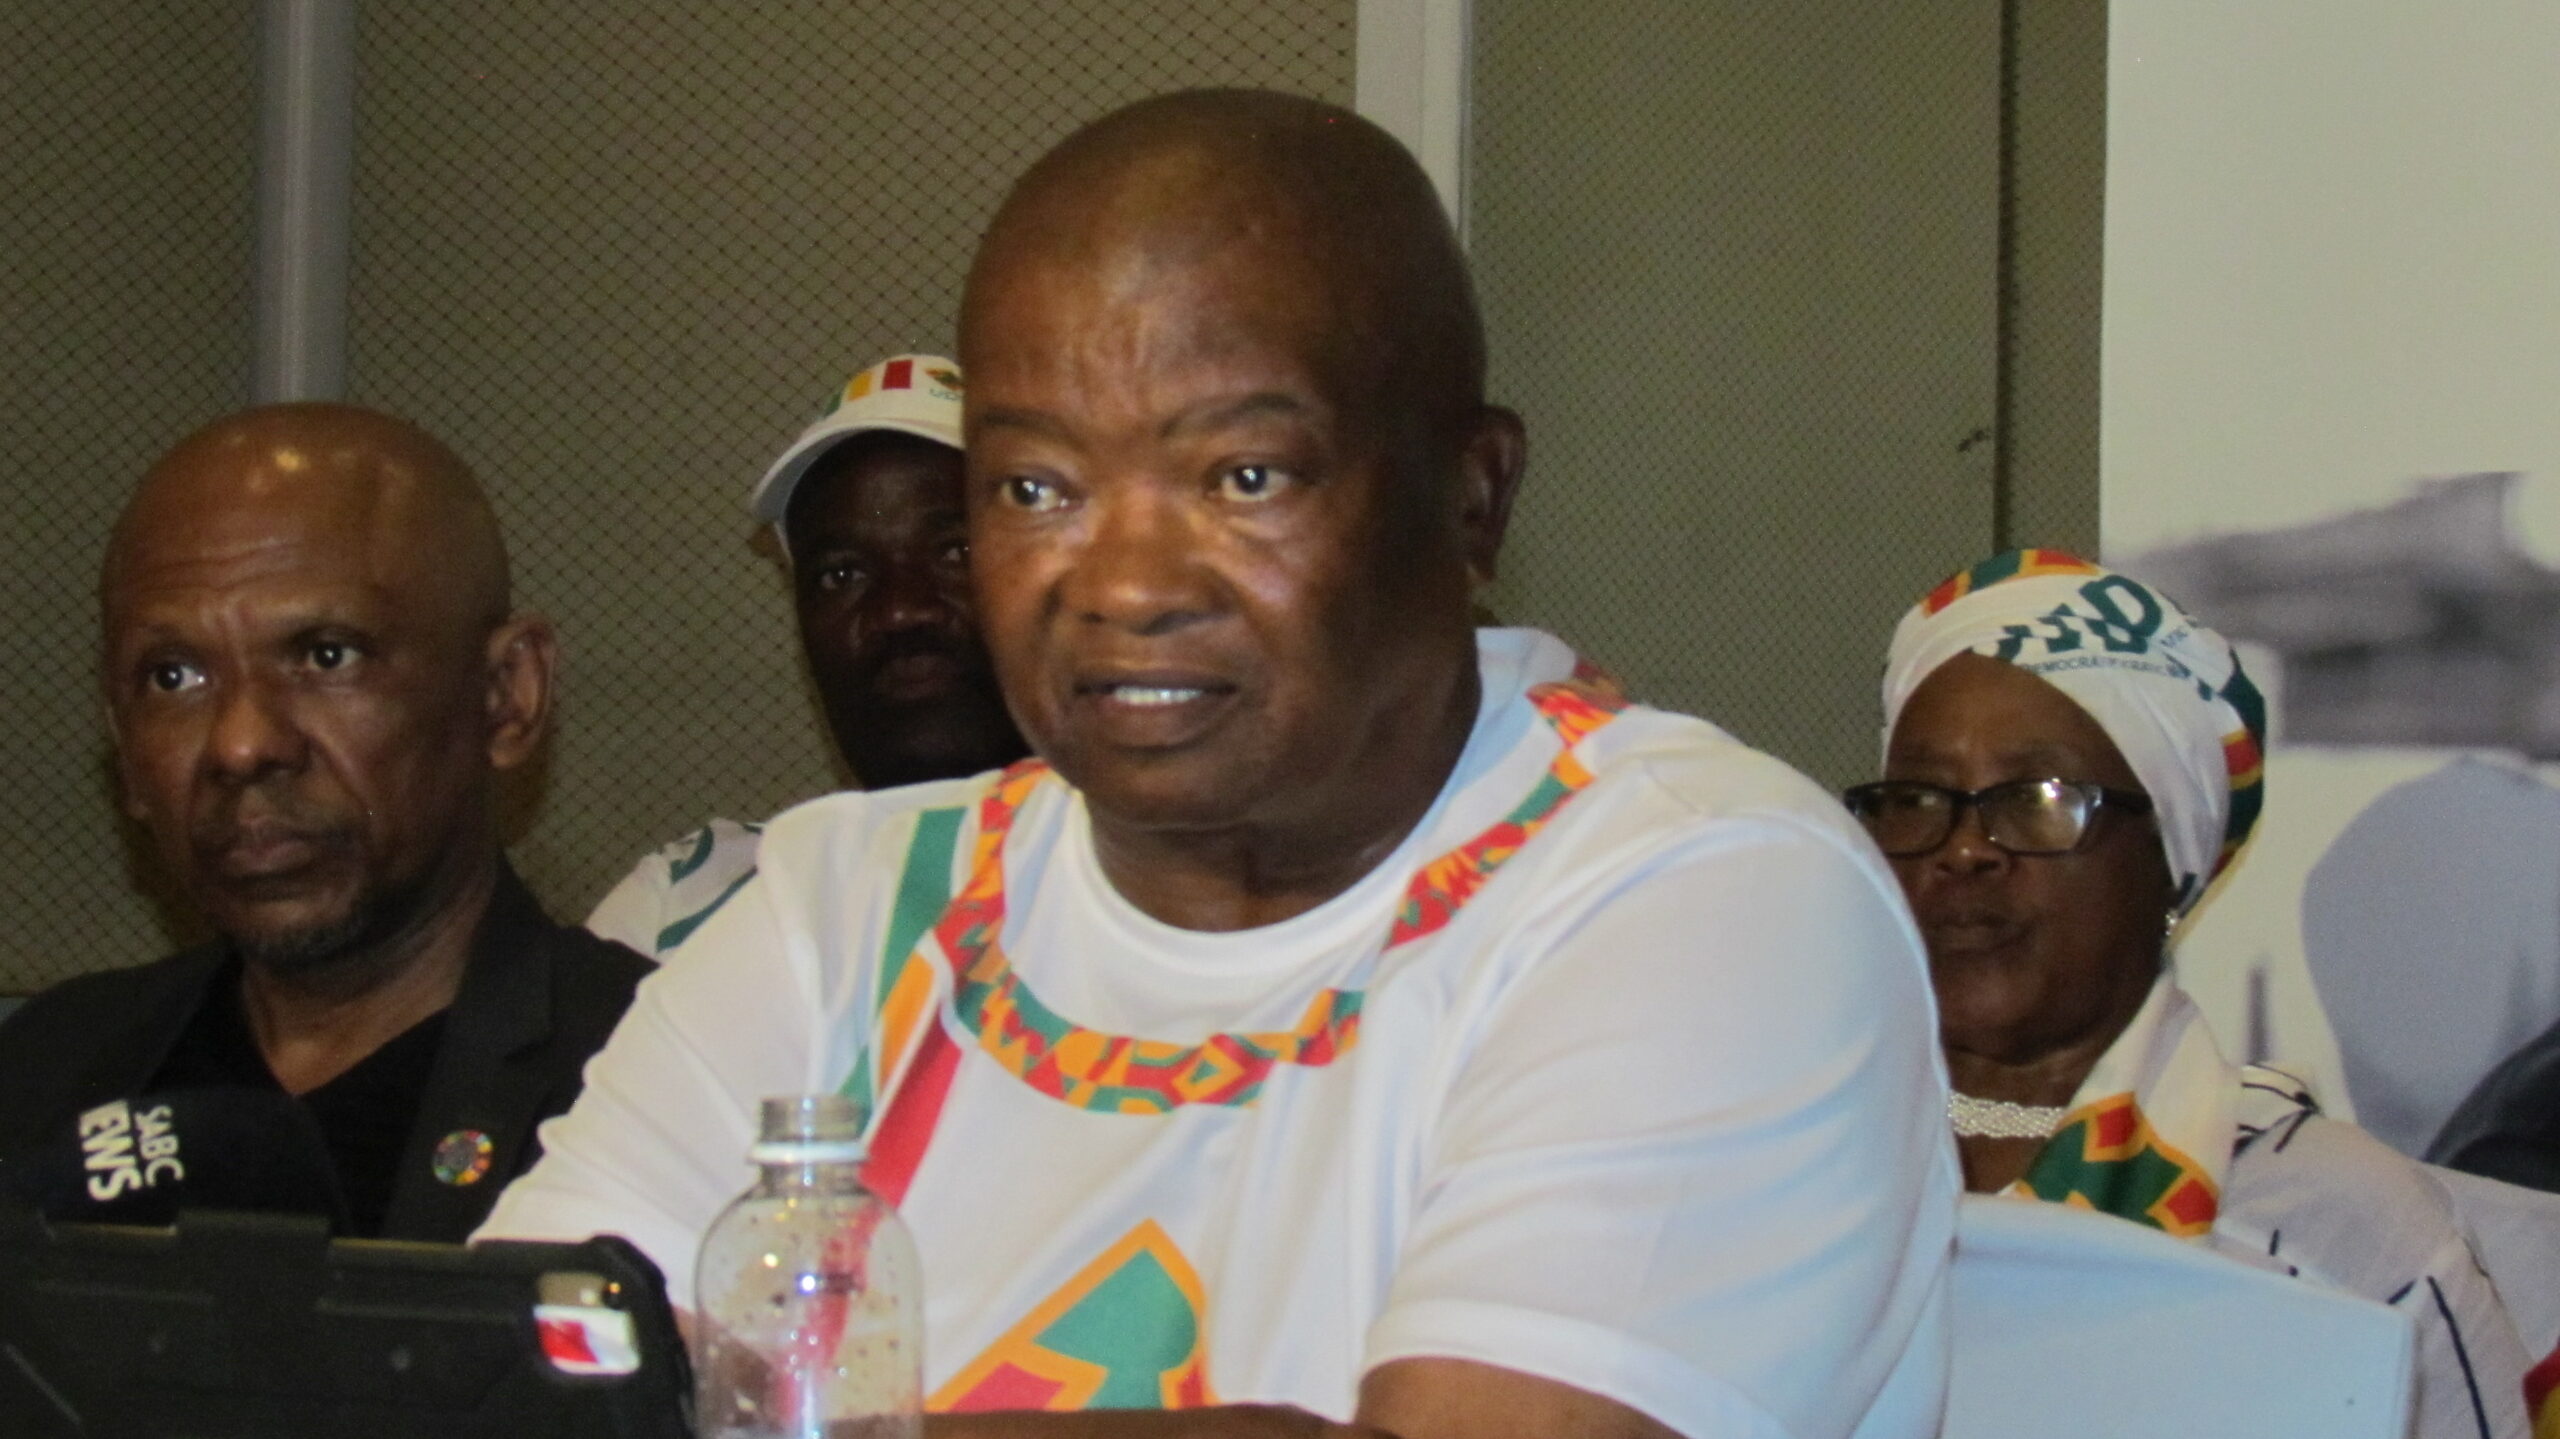 UDM Presidents Bantu Holomisa announcing new prominent members of the party at Sheraton Hotel in Tshwane